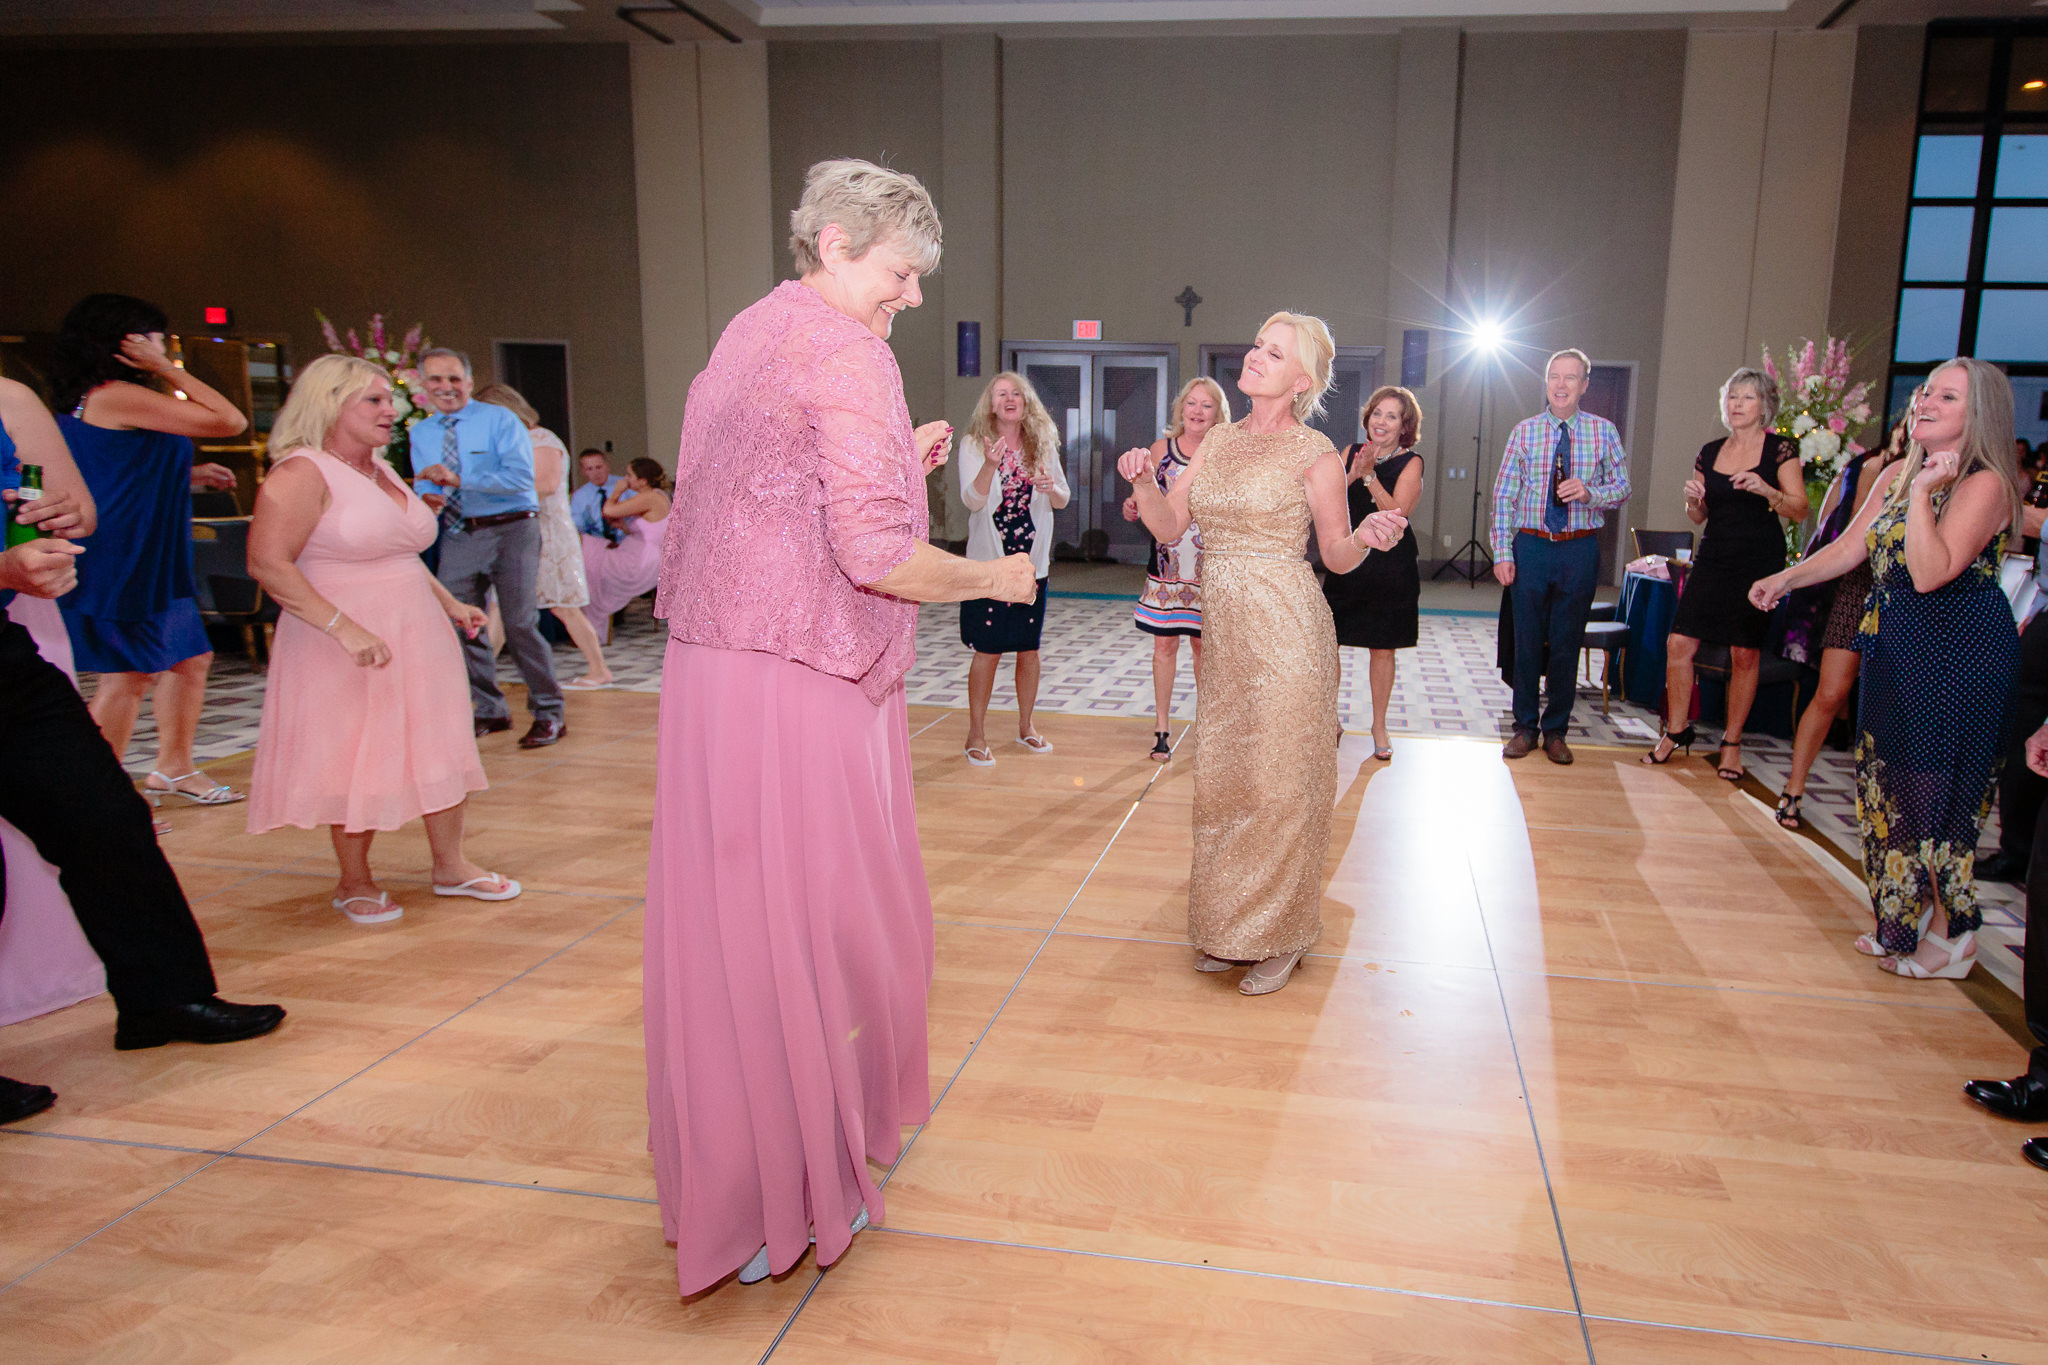 Mothers of the bride & groom dance together at a Duquesne University wedding reception